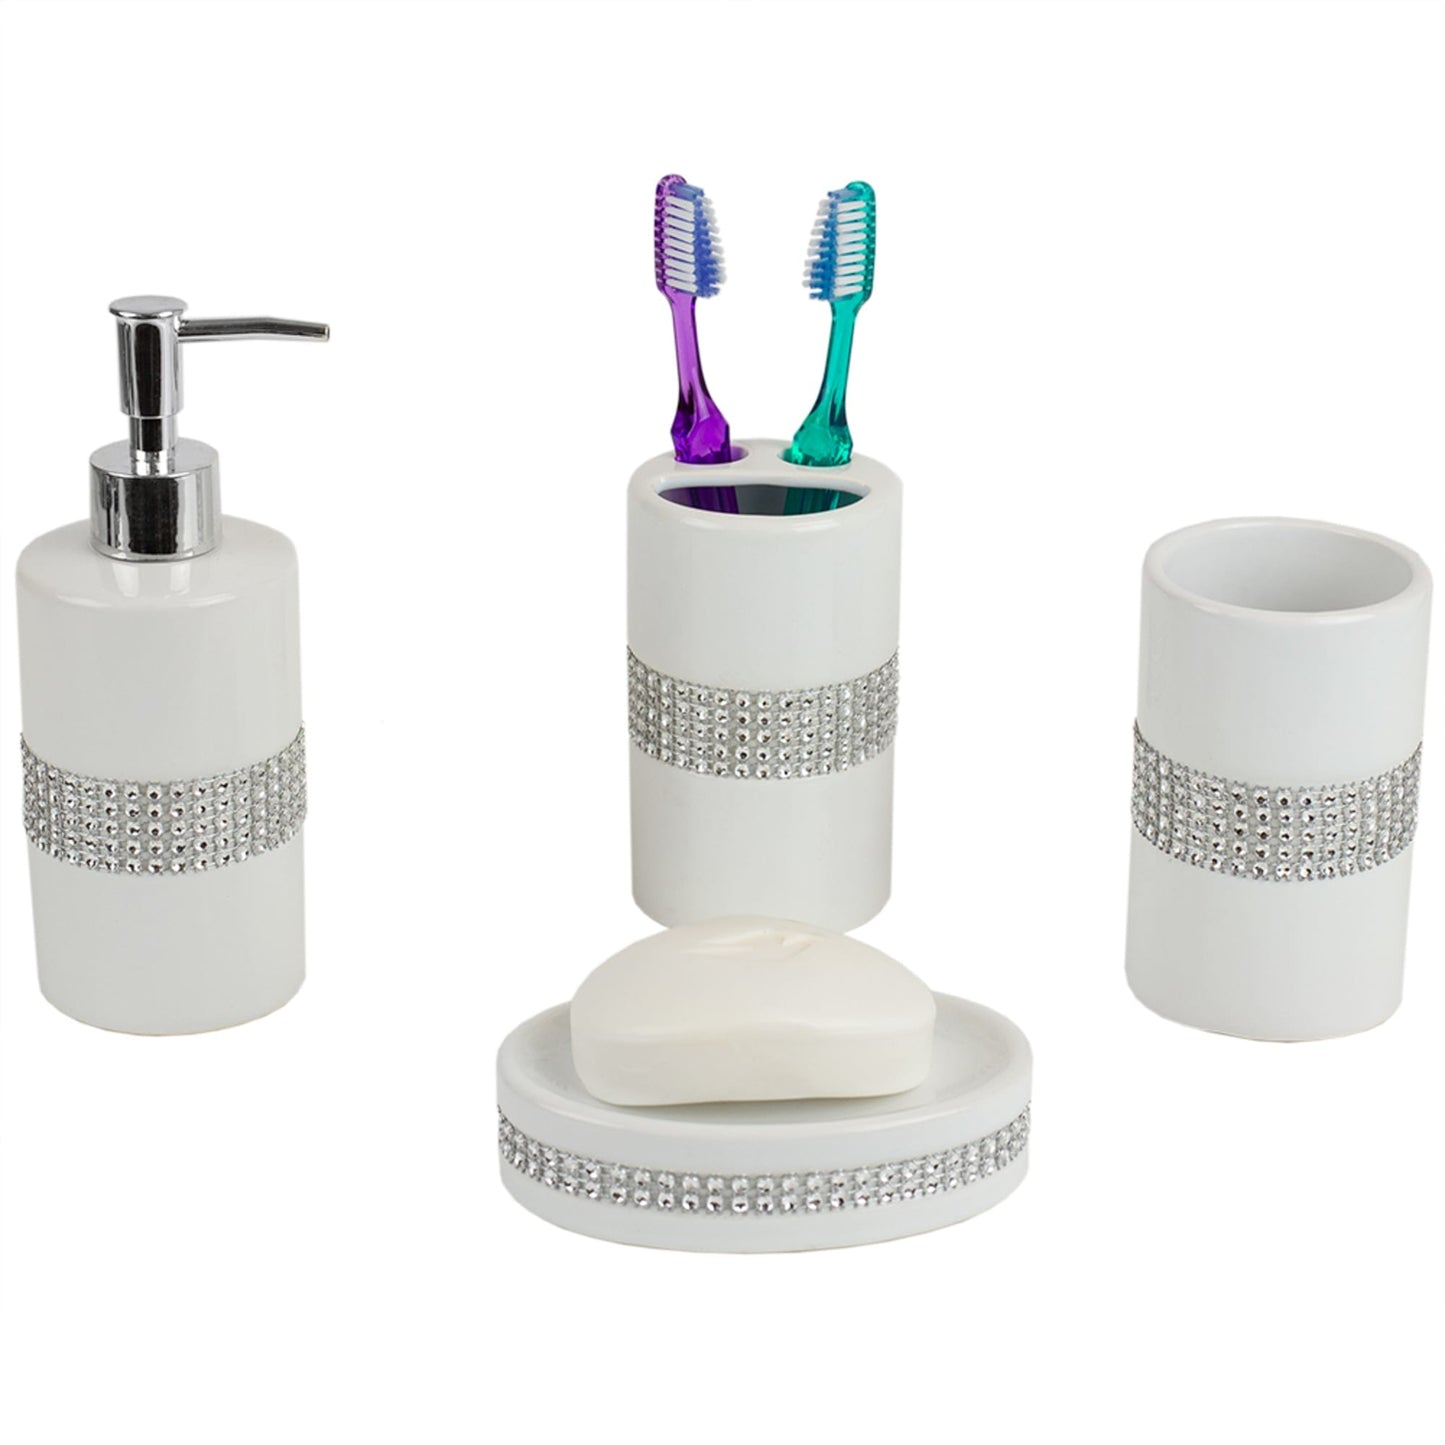 4 Piece Ceramic Luxury Bath Accessory Set with Stunning Sequin Accents, White